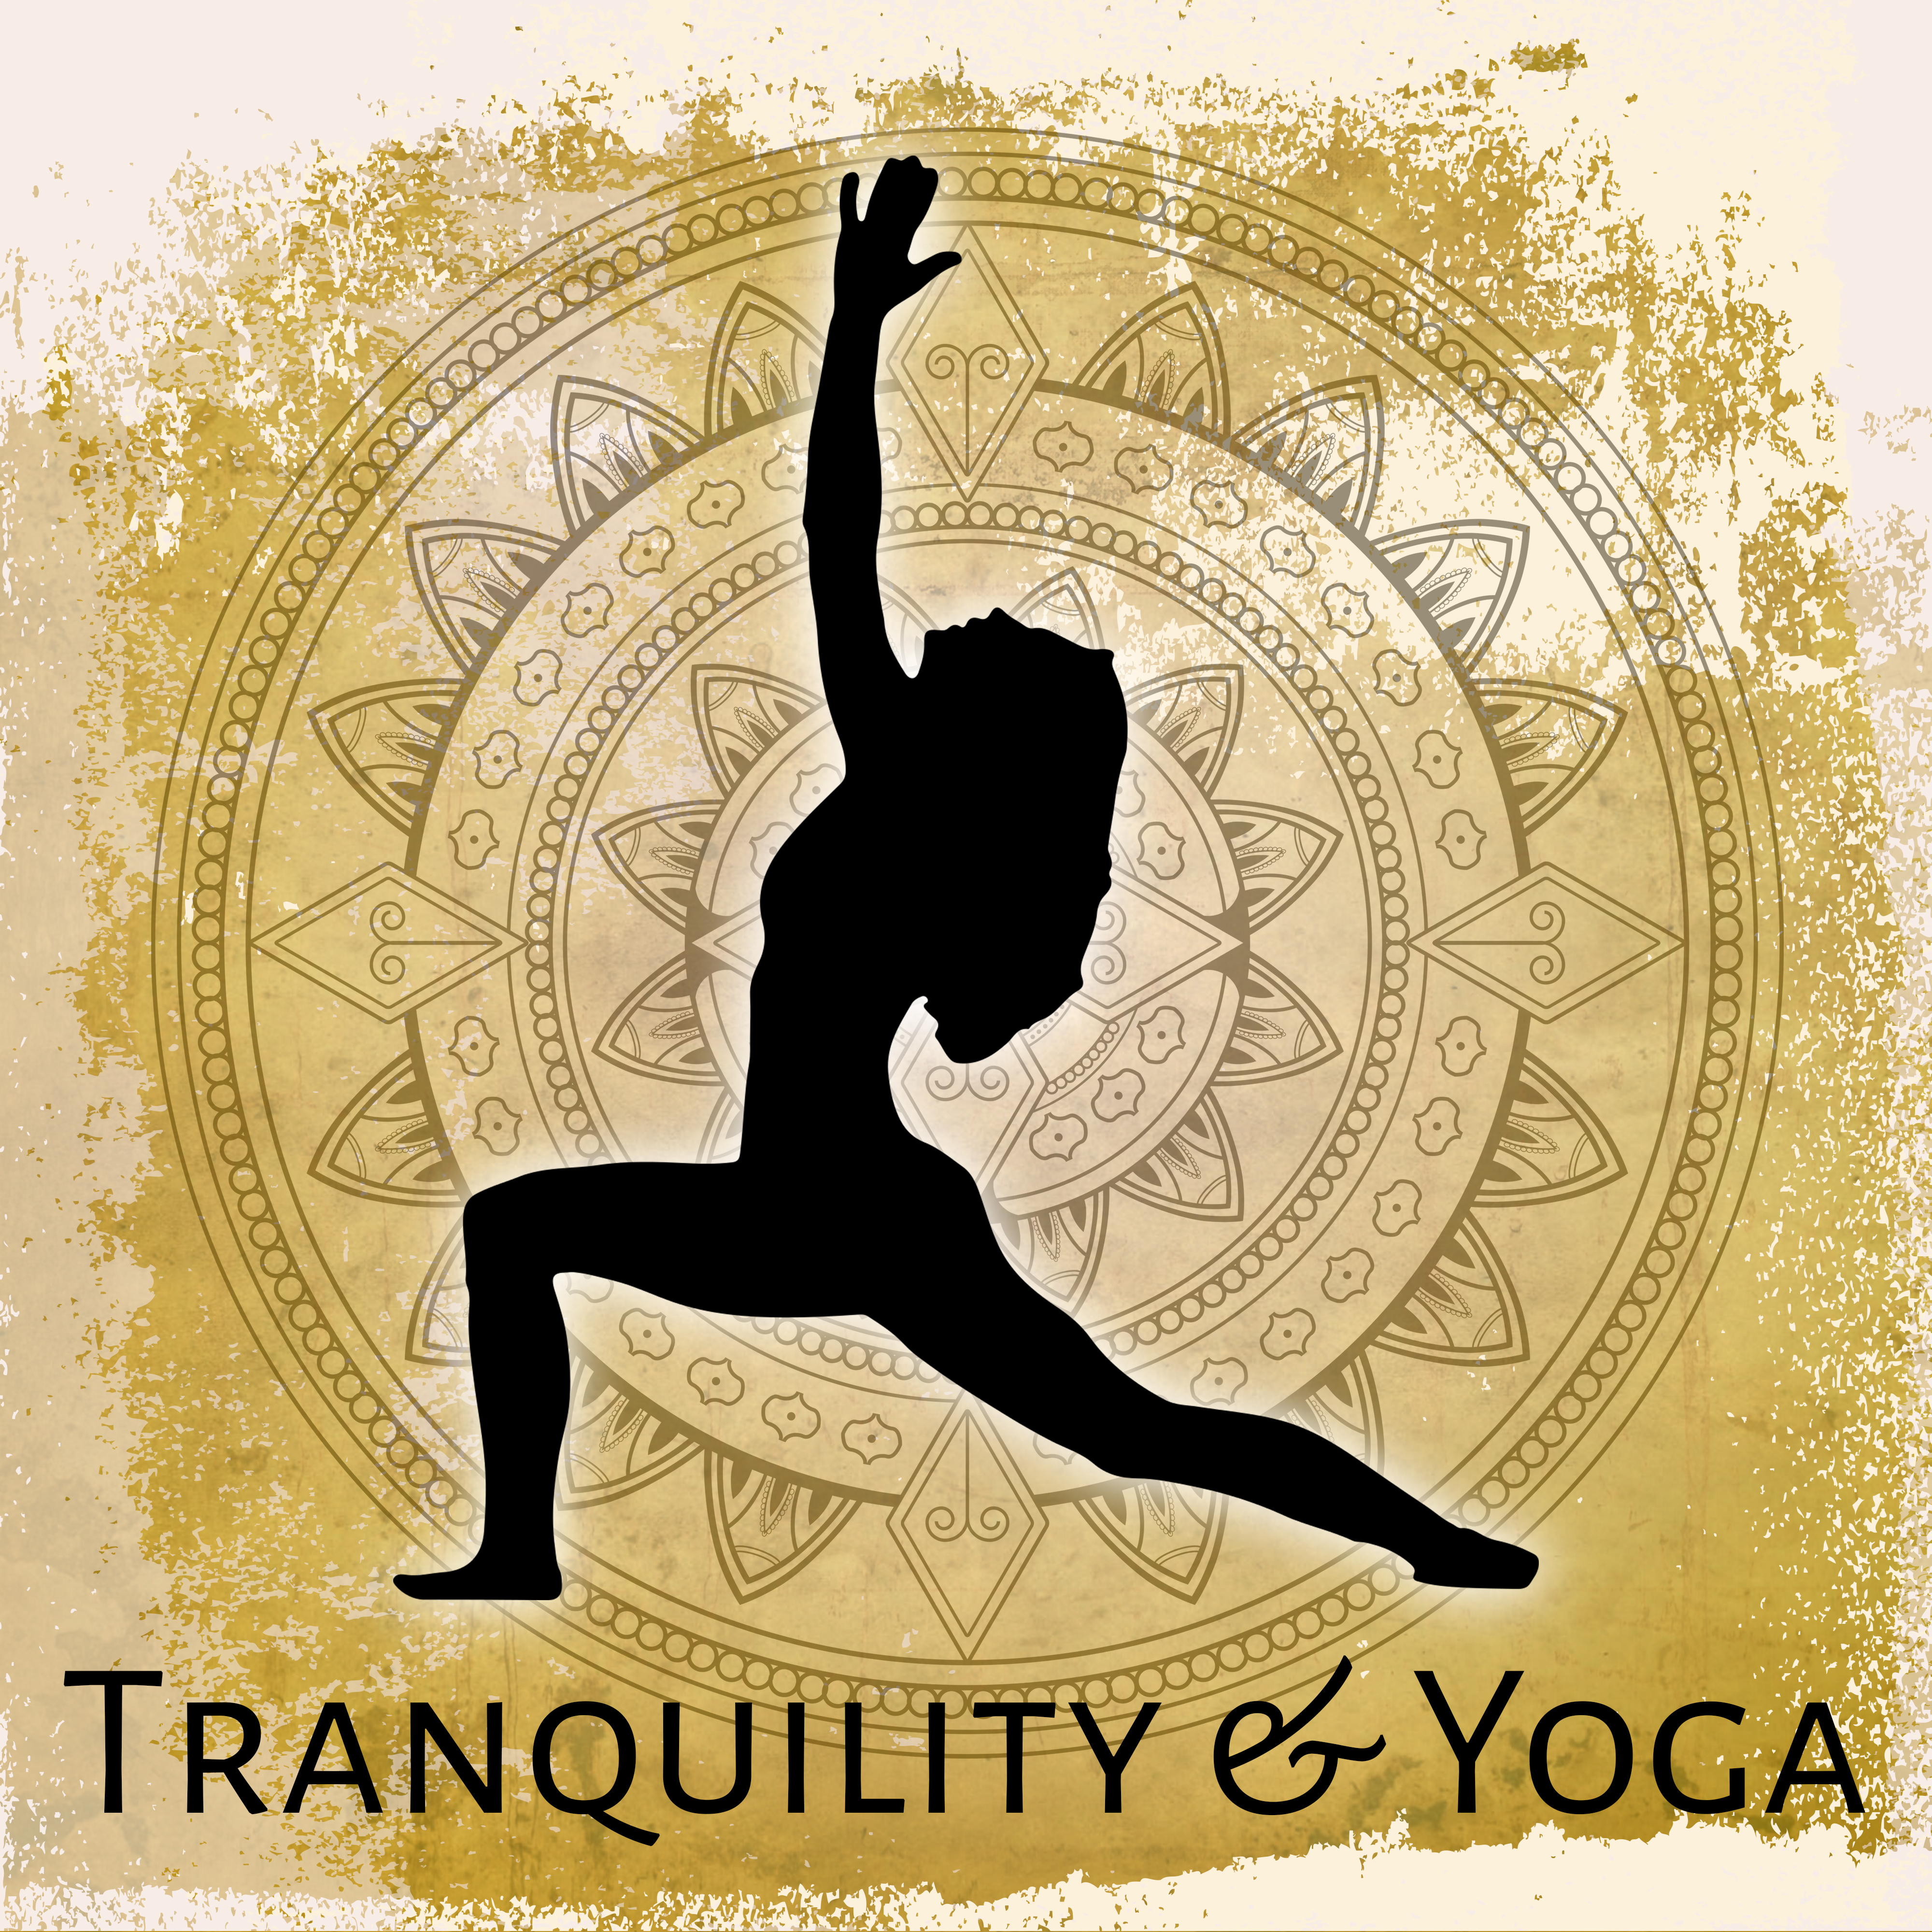 Tranquility  Yoga  Meditation Music, Train Your Mind, Tibetan Sounds, Restful Zen Music, Soothing Water, Deep Focus